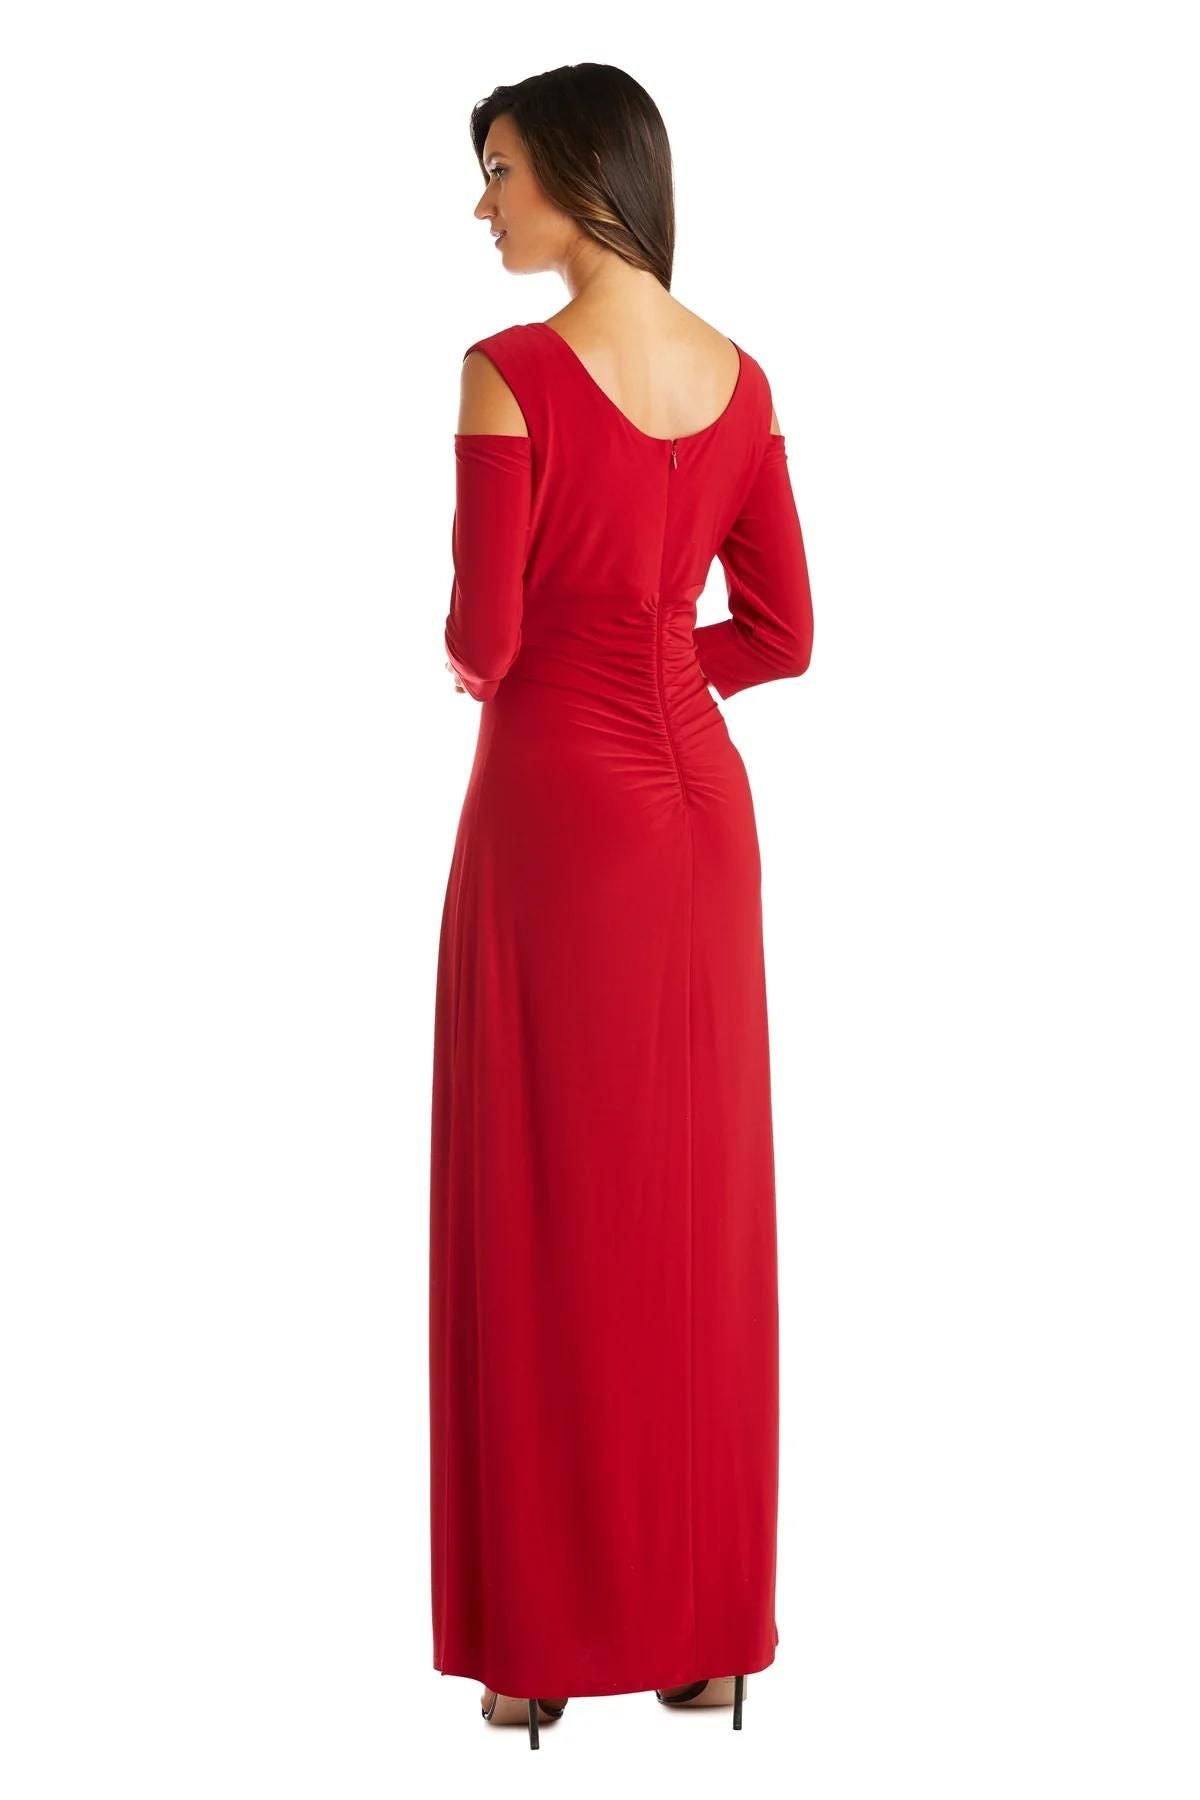 Women's Empire Waist Cold Shoulder Dress with Sleeves - Evening Gown